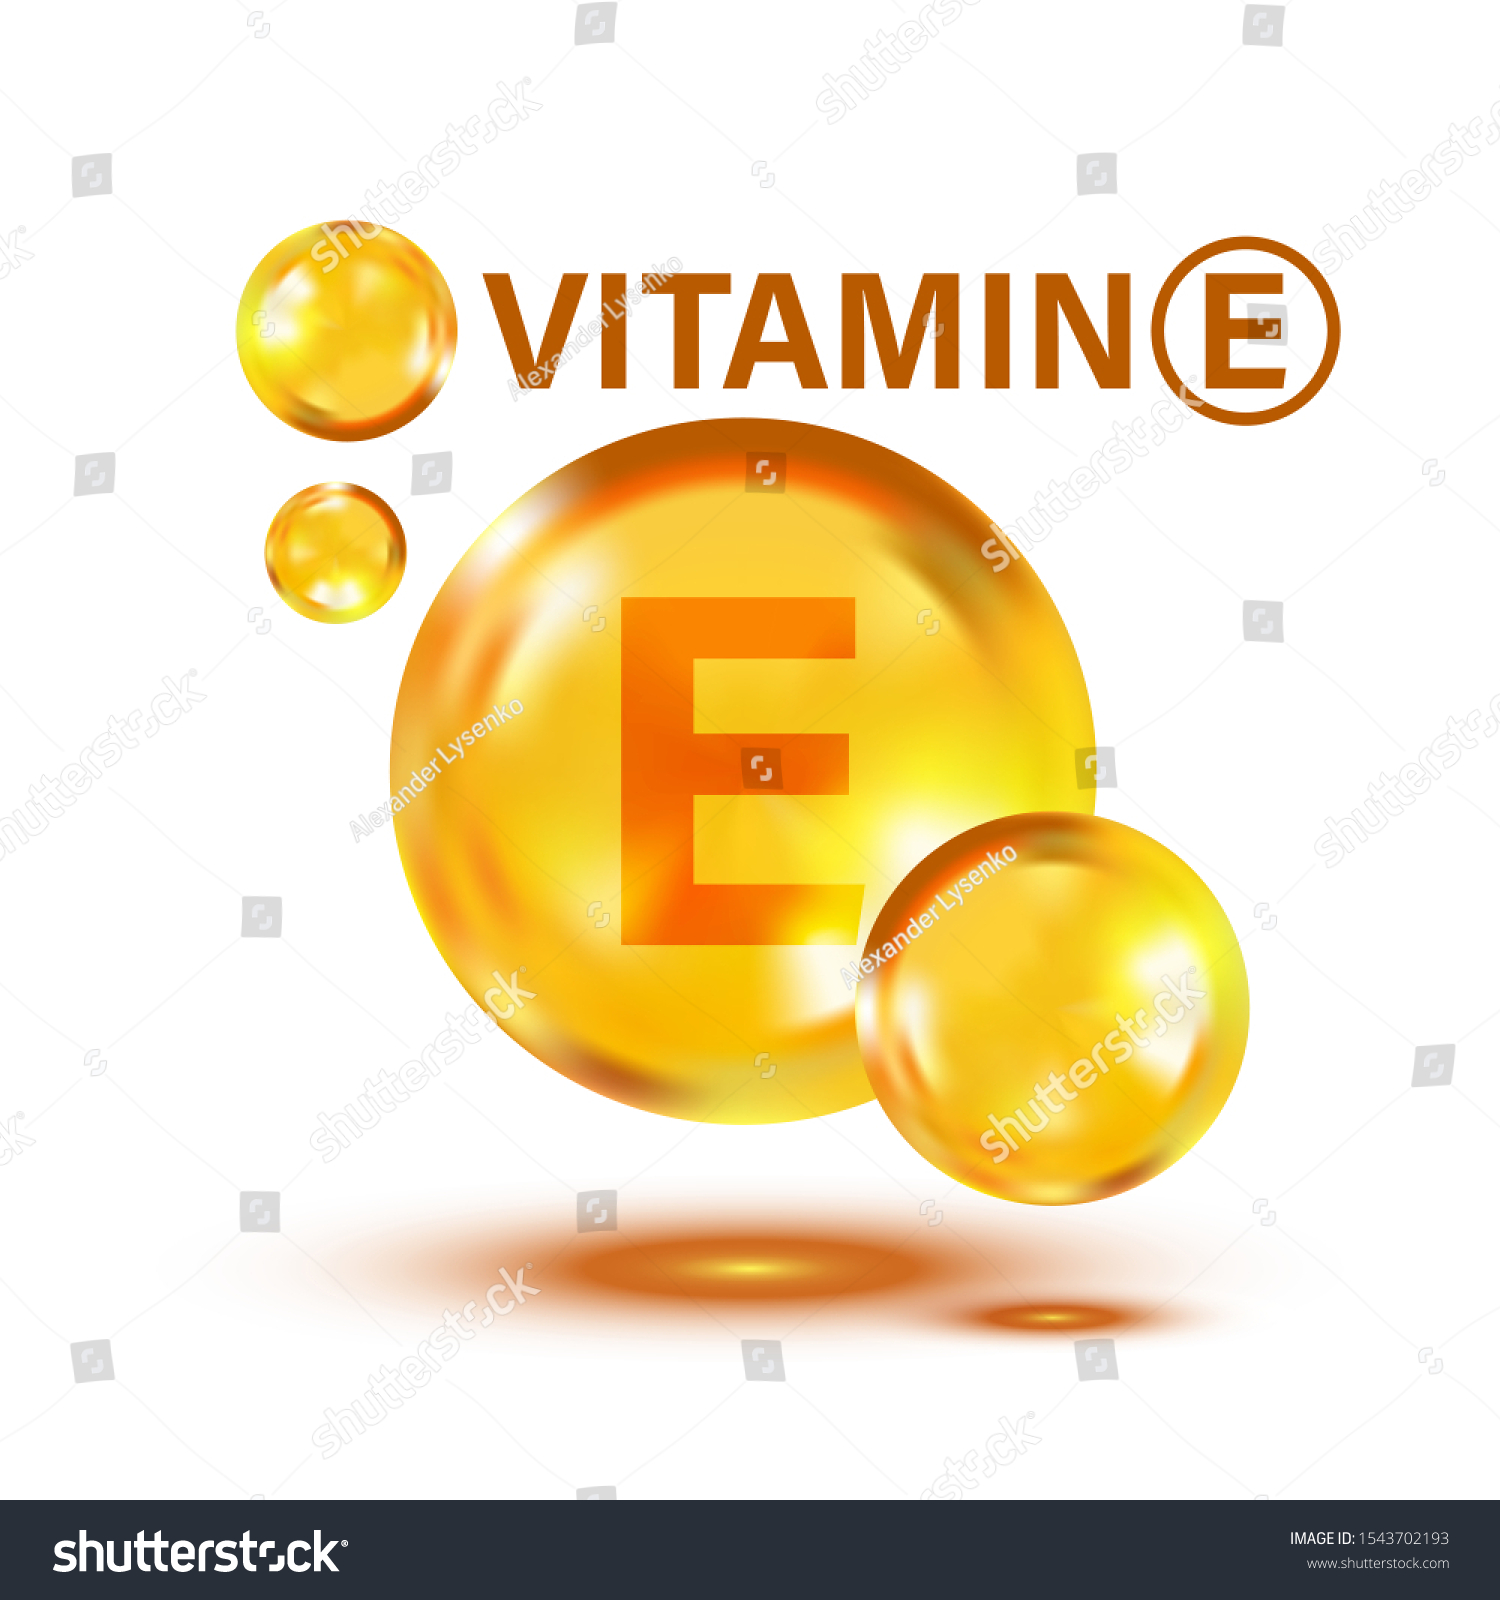 Vitamin E icon in flat style. Pill capcule vector illustration on white isolated background. Skincare business concept. #1543702193